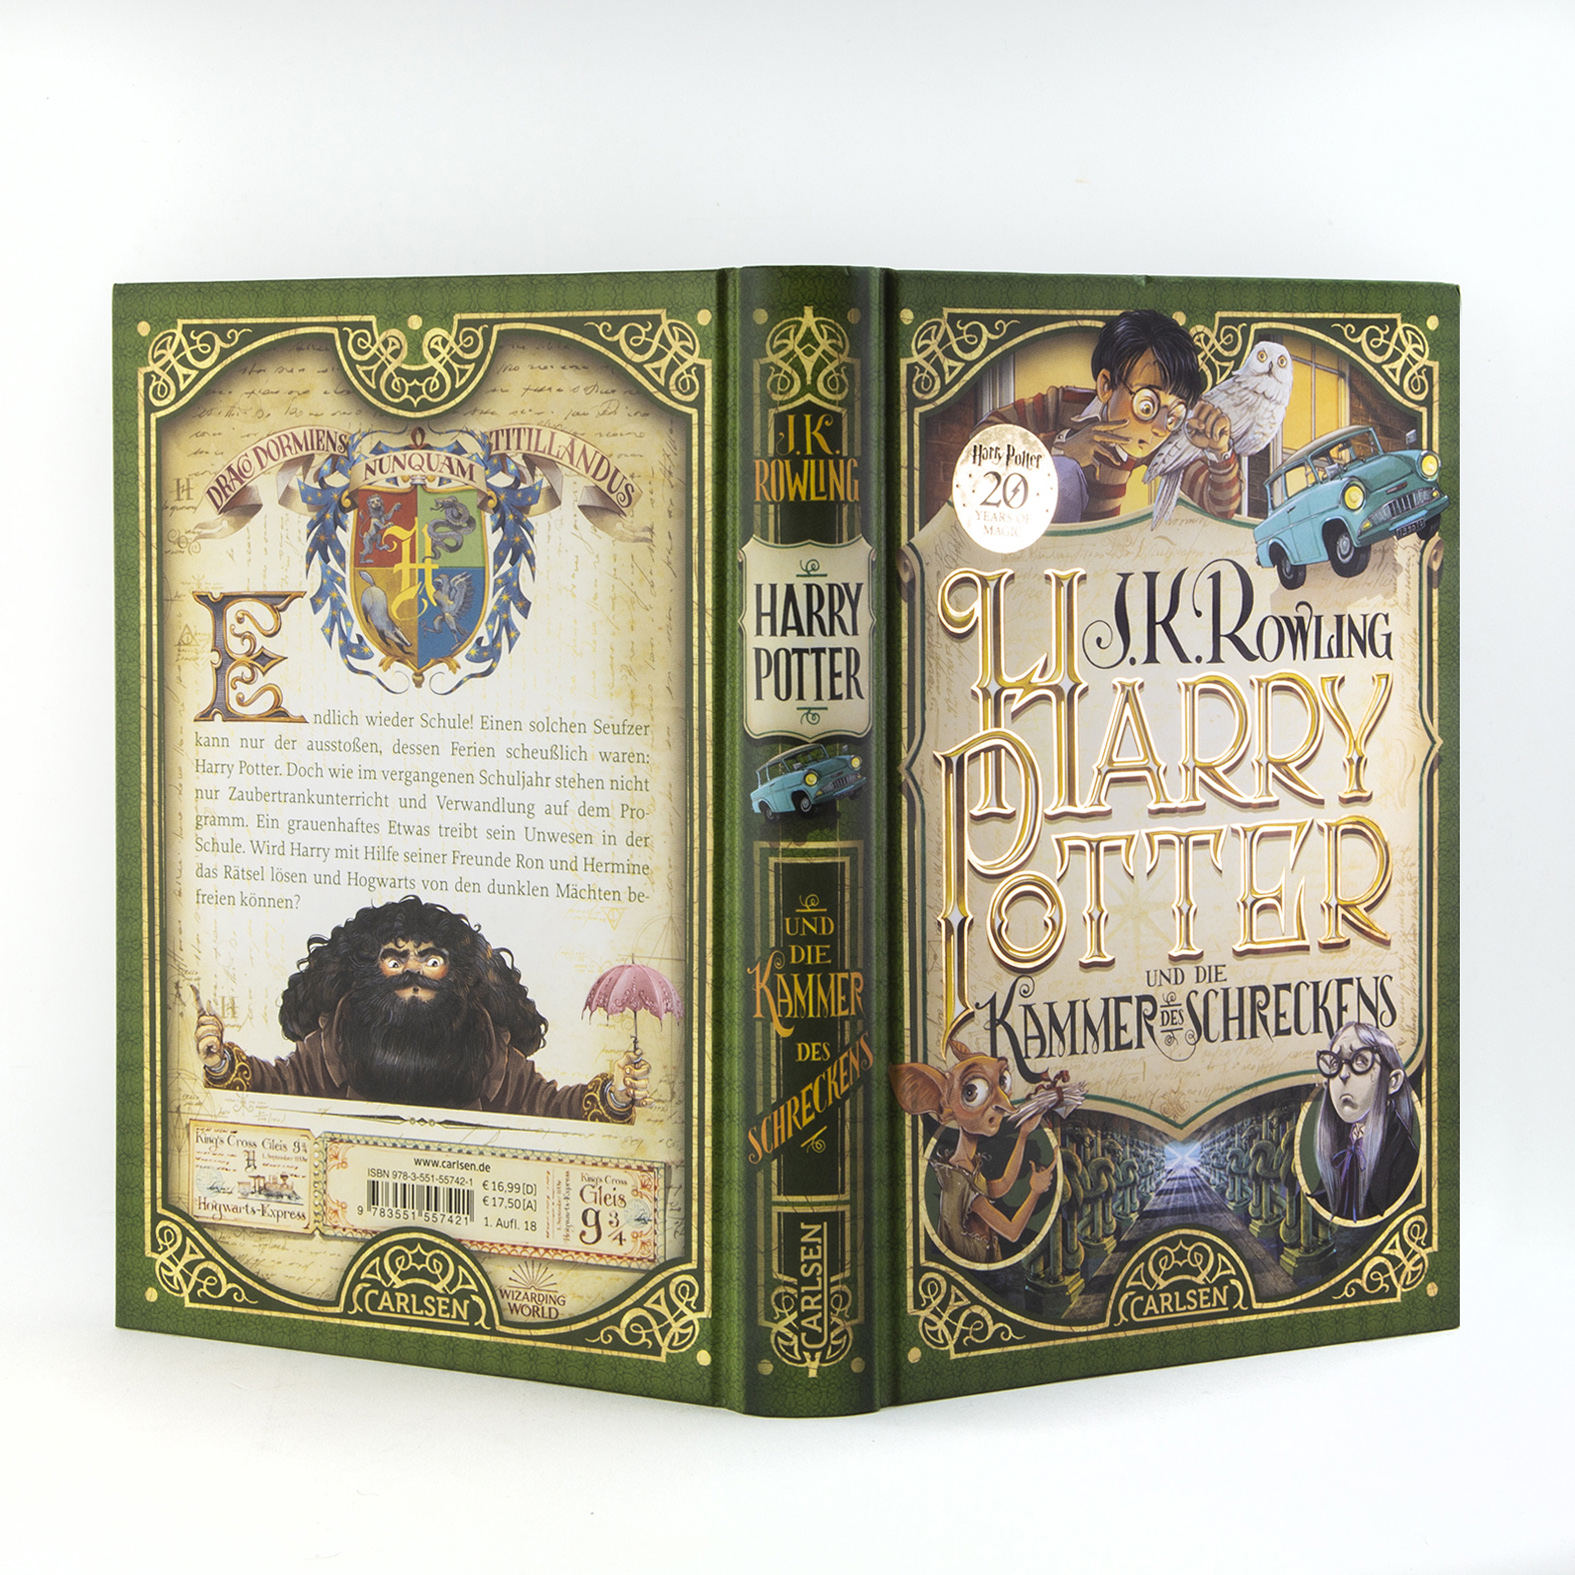 Limited Edition 20th Anniversary Harry Potter Box